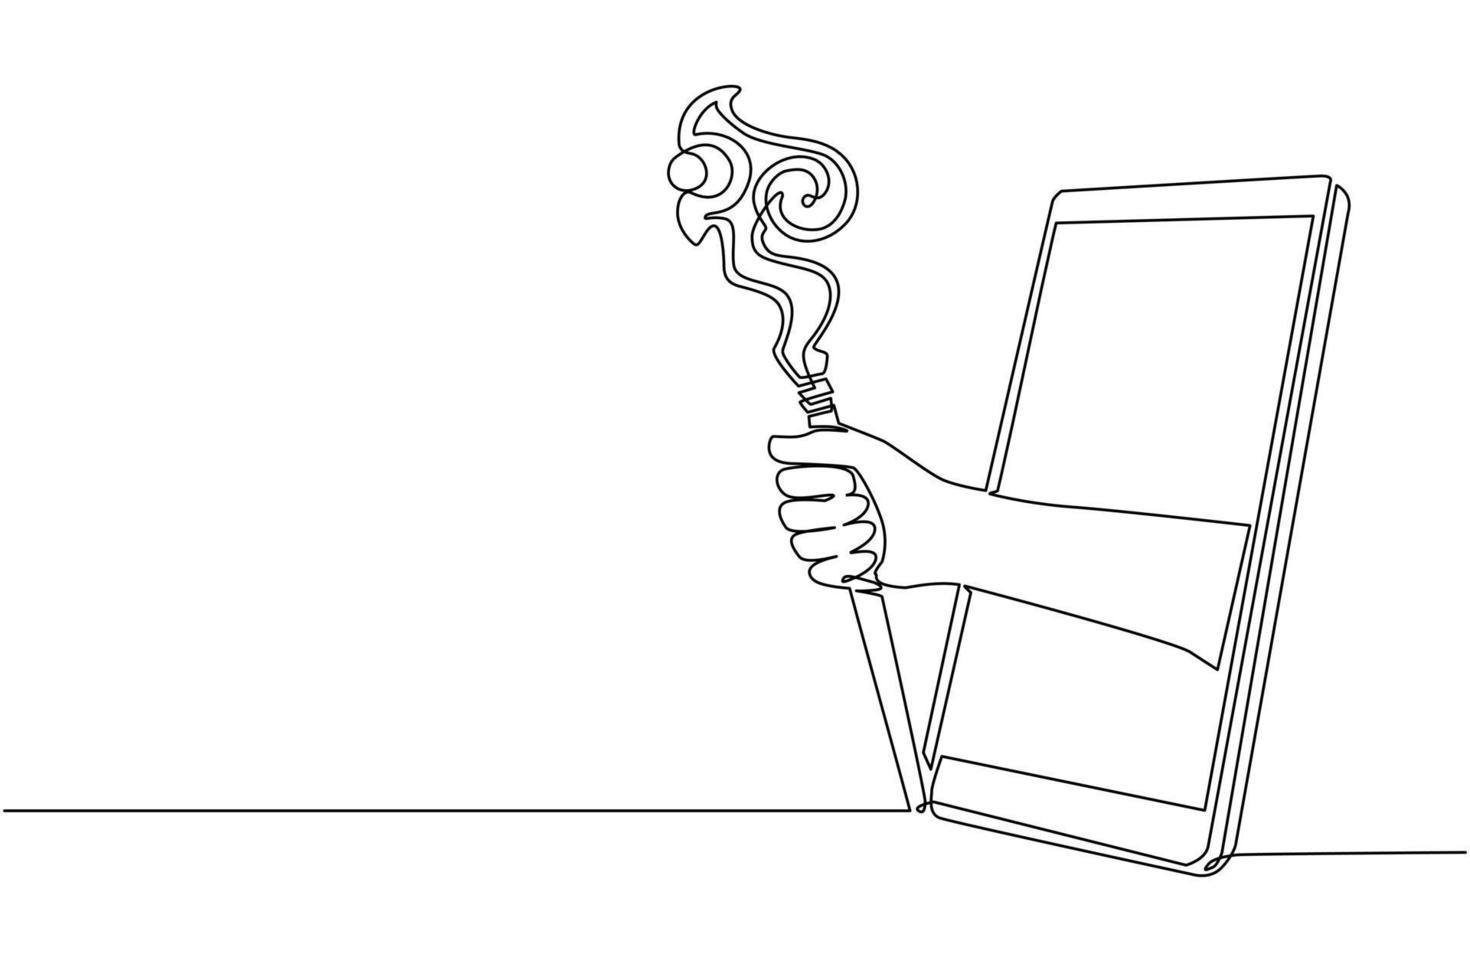 Single continuous line drawing hand holding wizards wooden staff through mobile phone. Concept of mobile games, e-sport, entertainment application for smartphones. One line draw graphic design vector